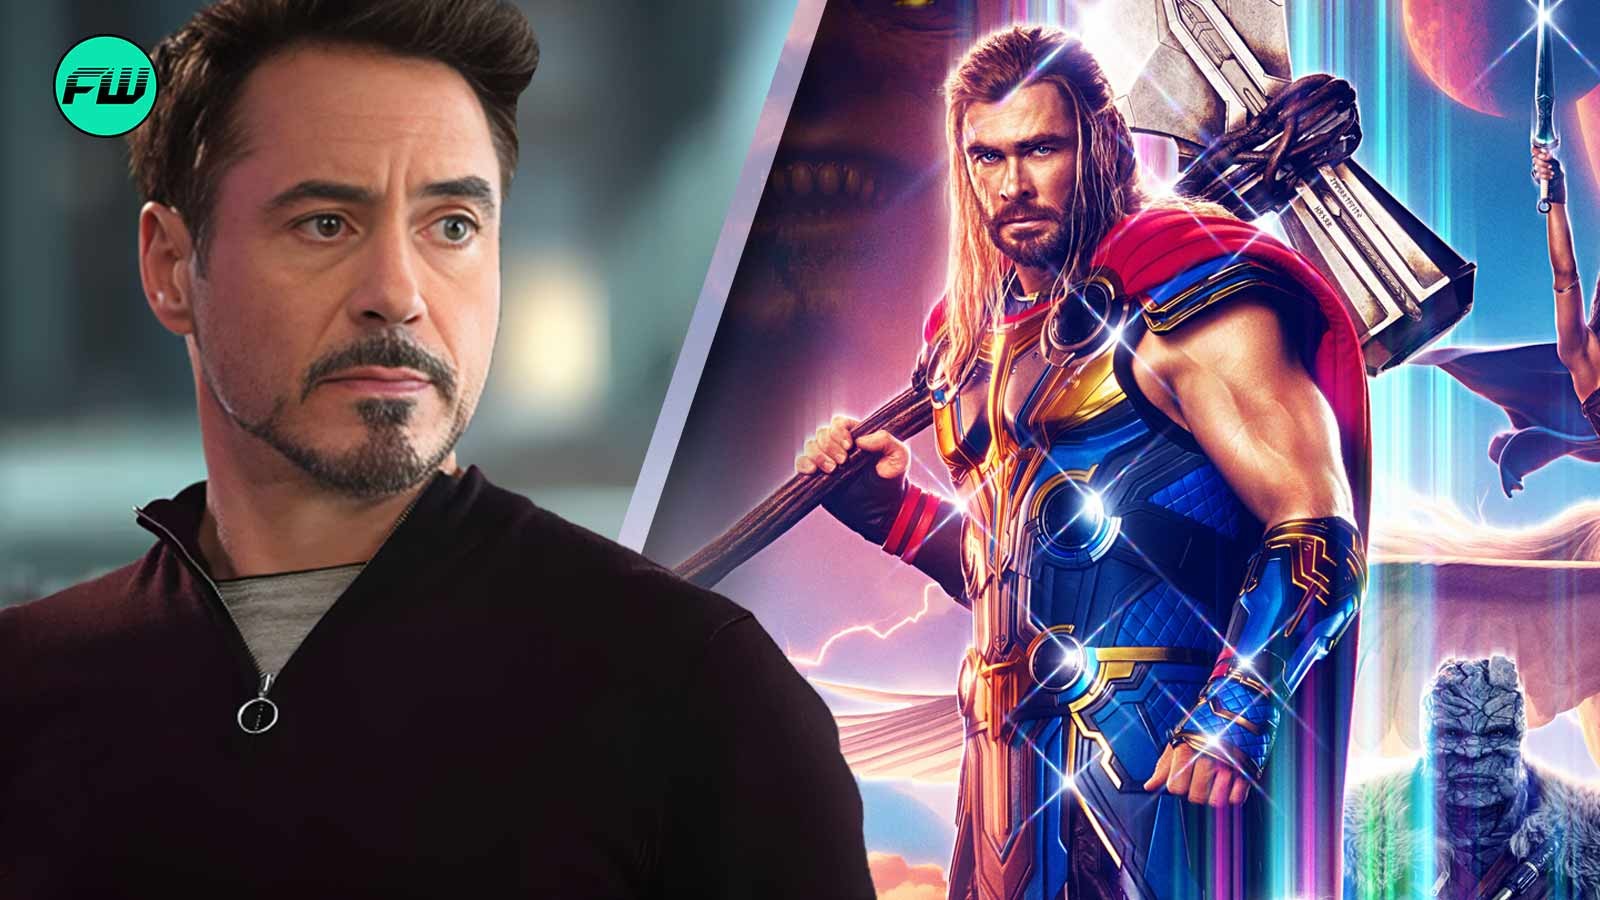 Chris Hemsworth could compete with Tony Stark in the fight for the crown of the best father in the MCU